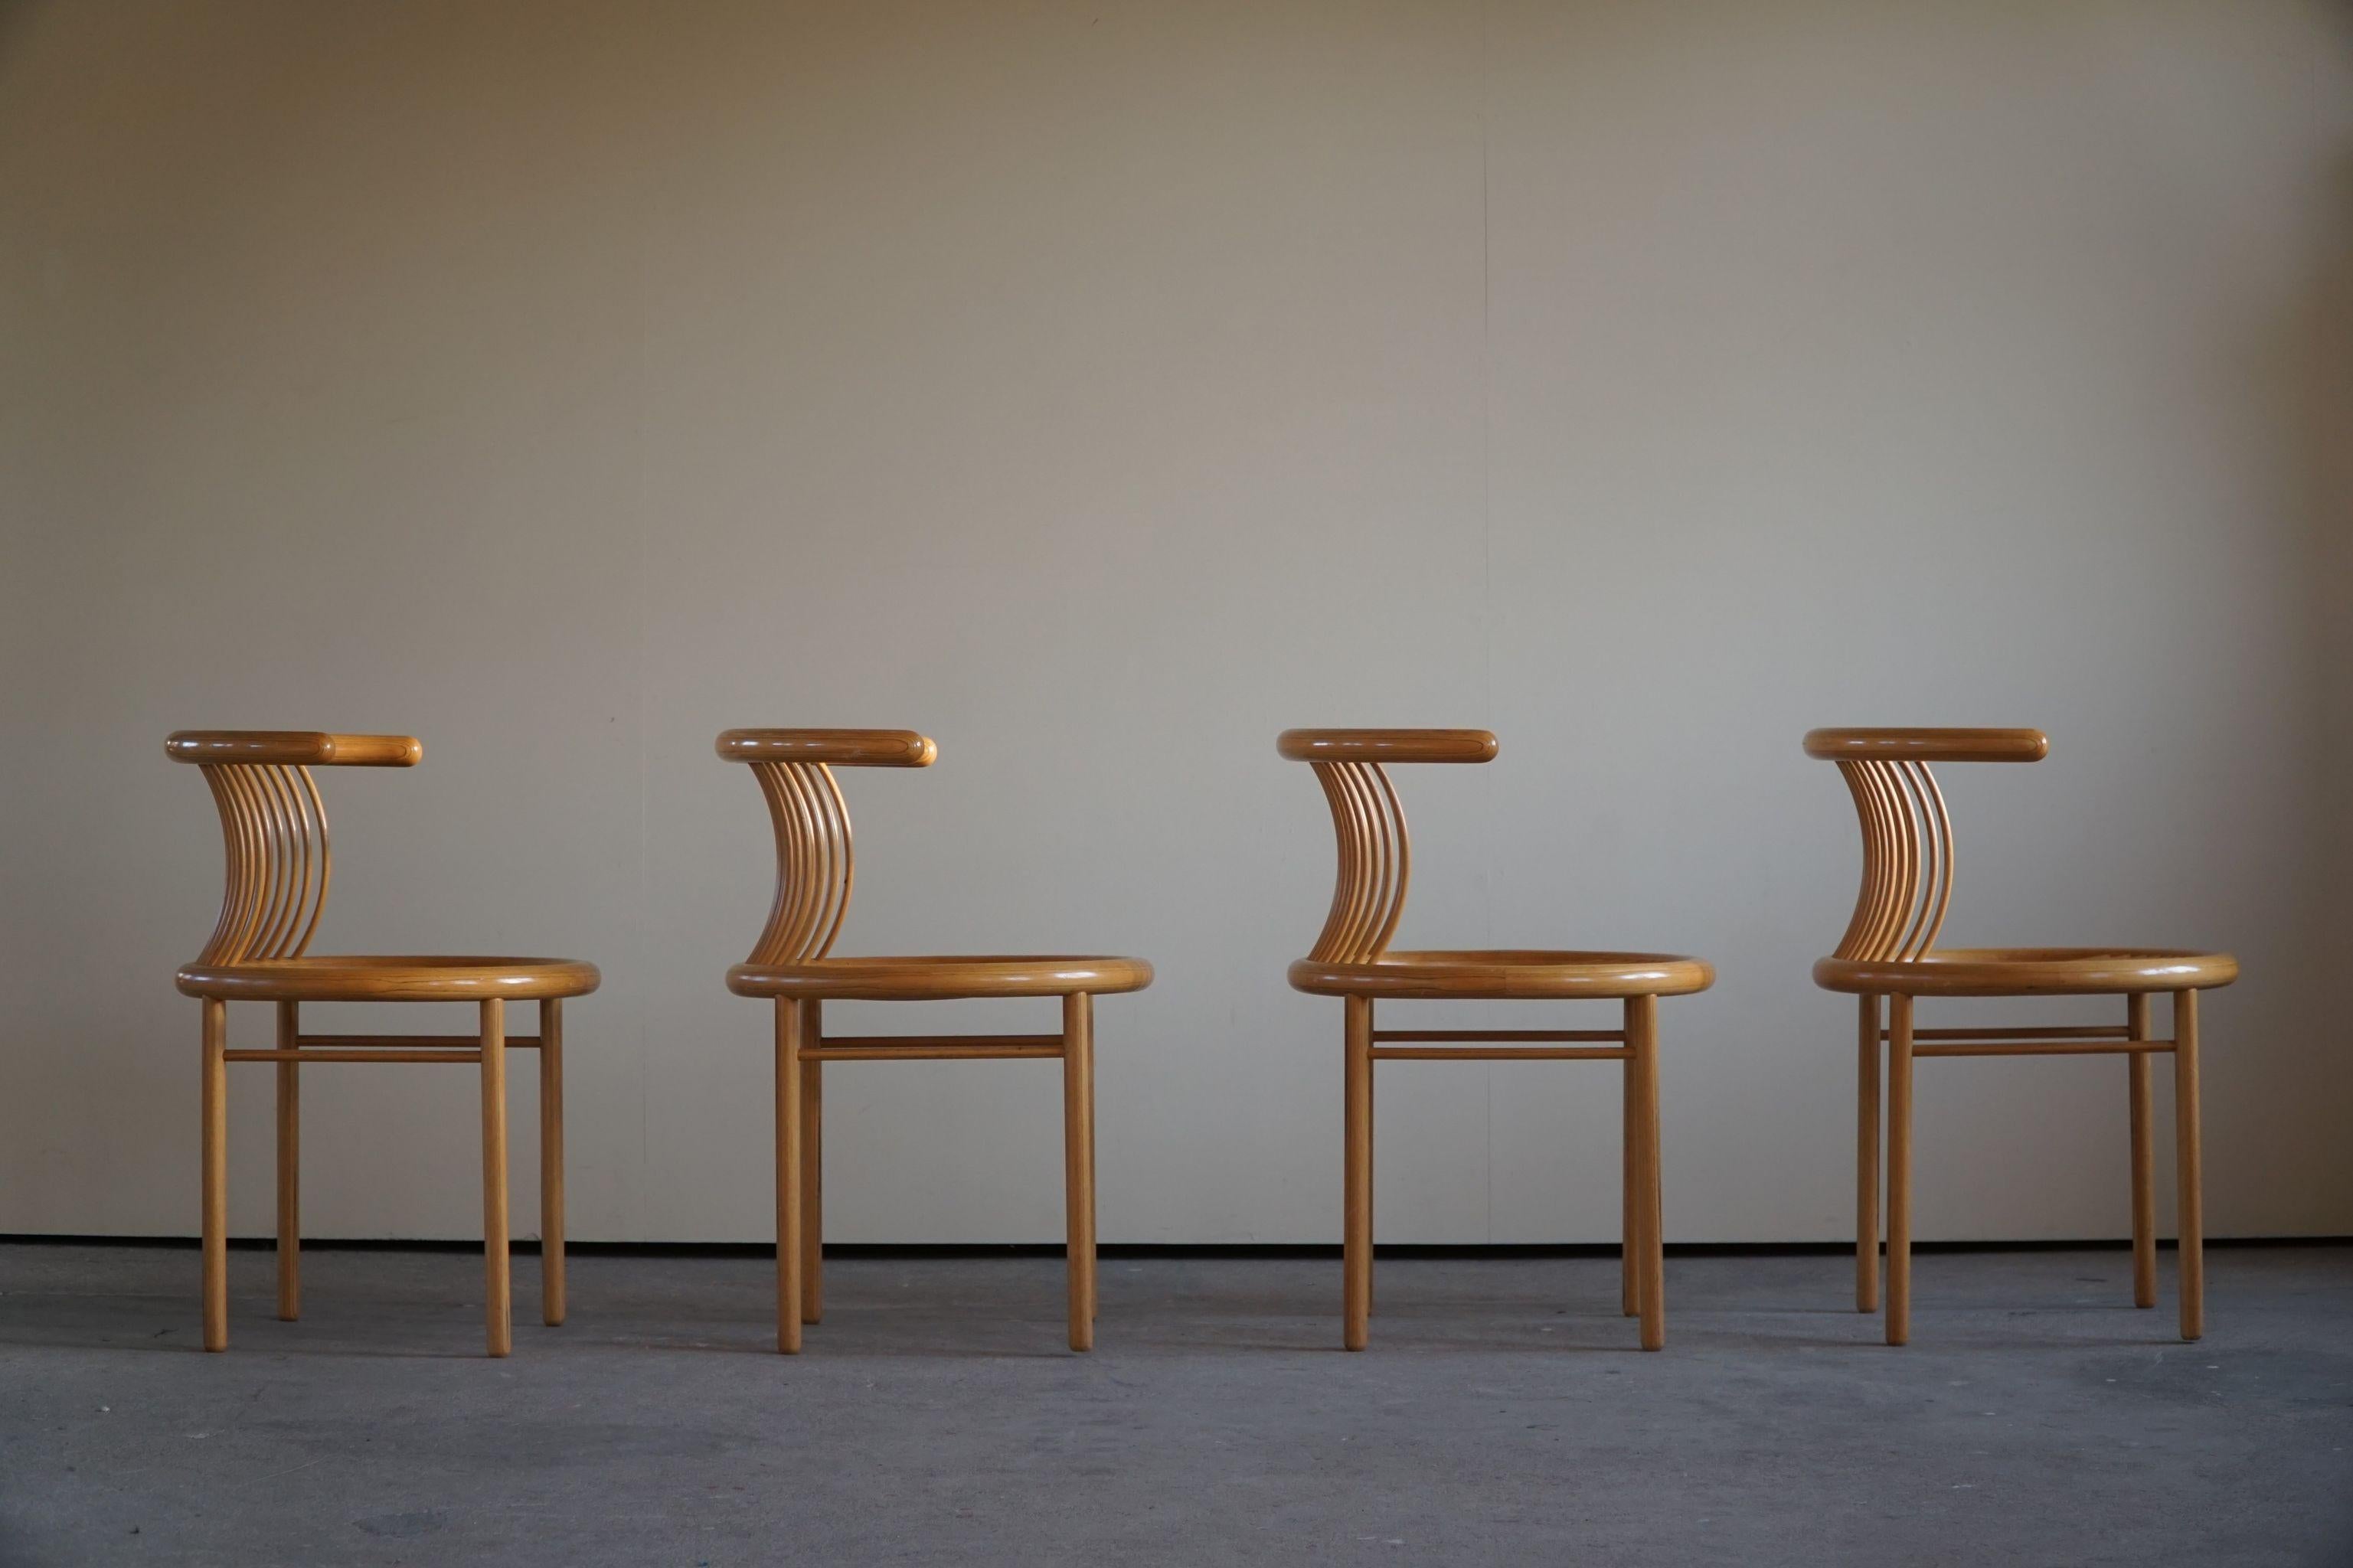 Set of 4 dining chairs by Helmut Lübke, made in Germany circa 1960's. The chairs are in very good, original condition, showing only light wear. 

A sculptural set that fits every kind of interior deco.